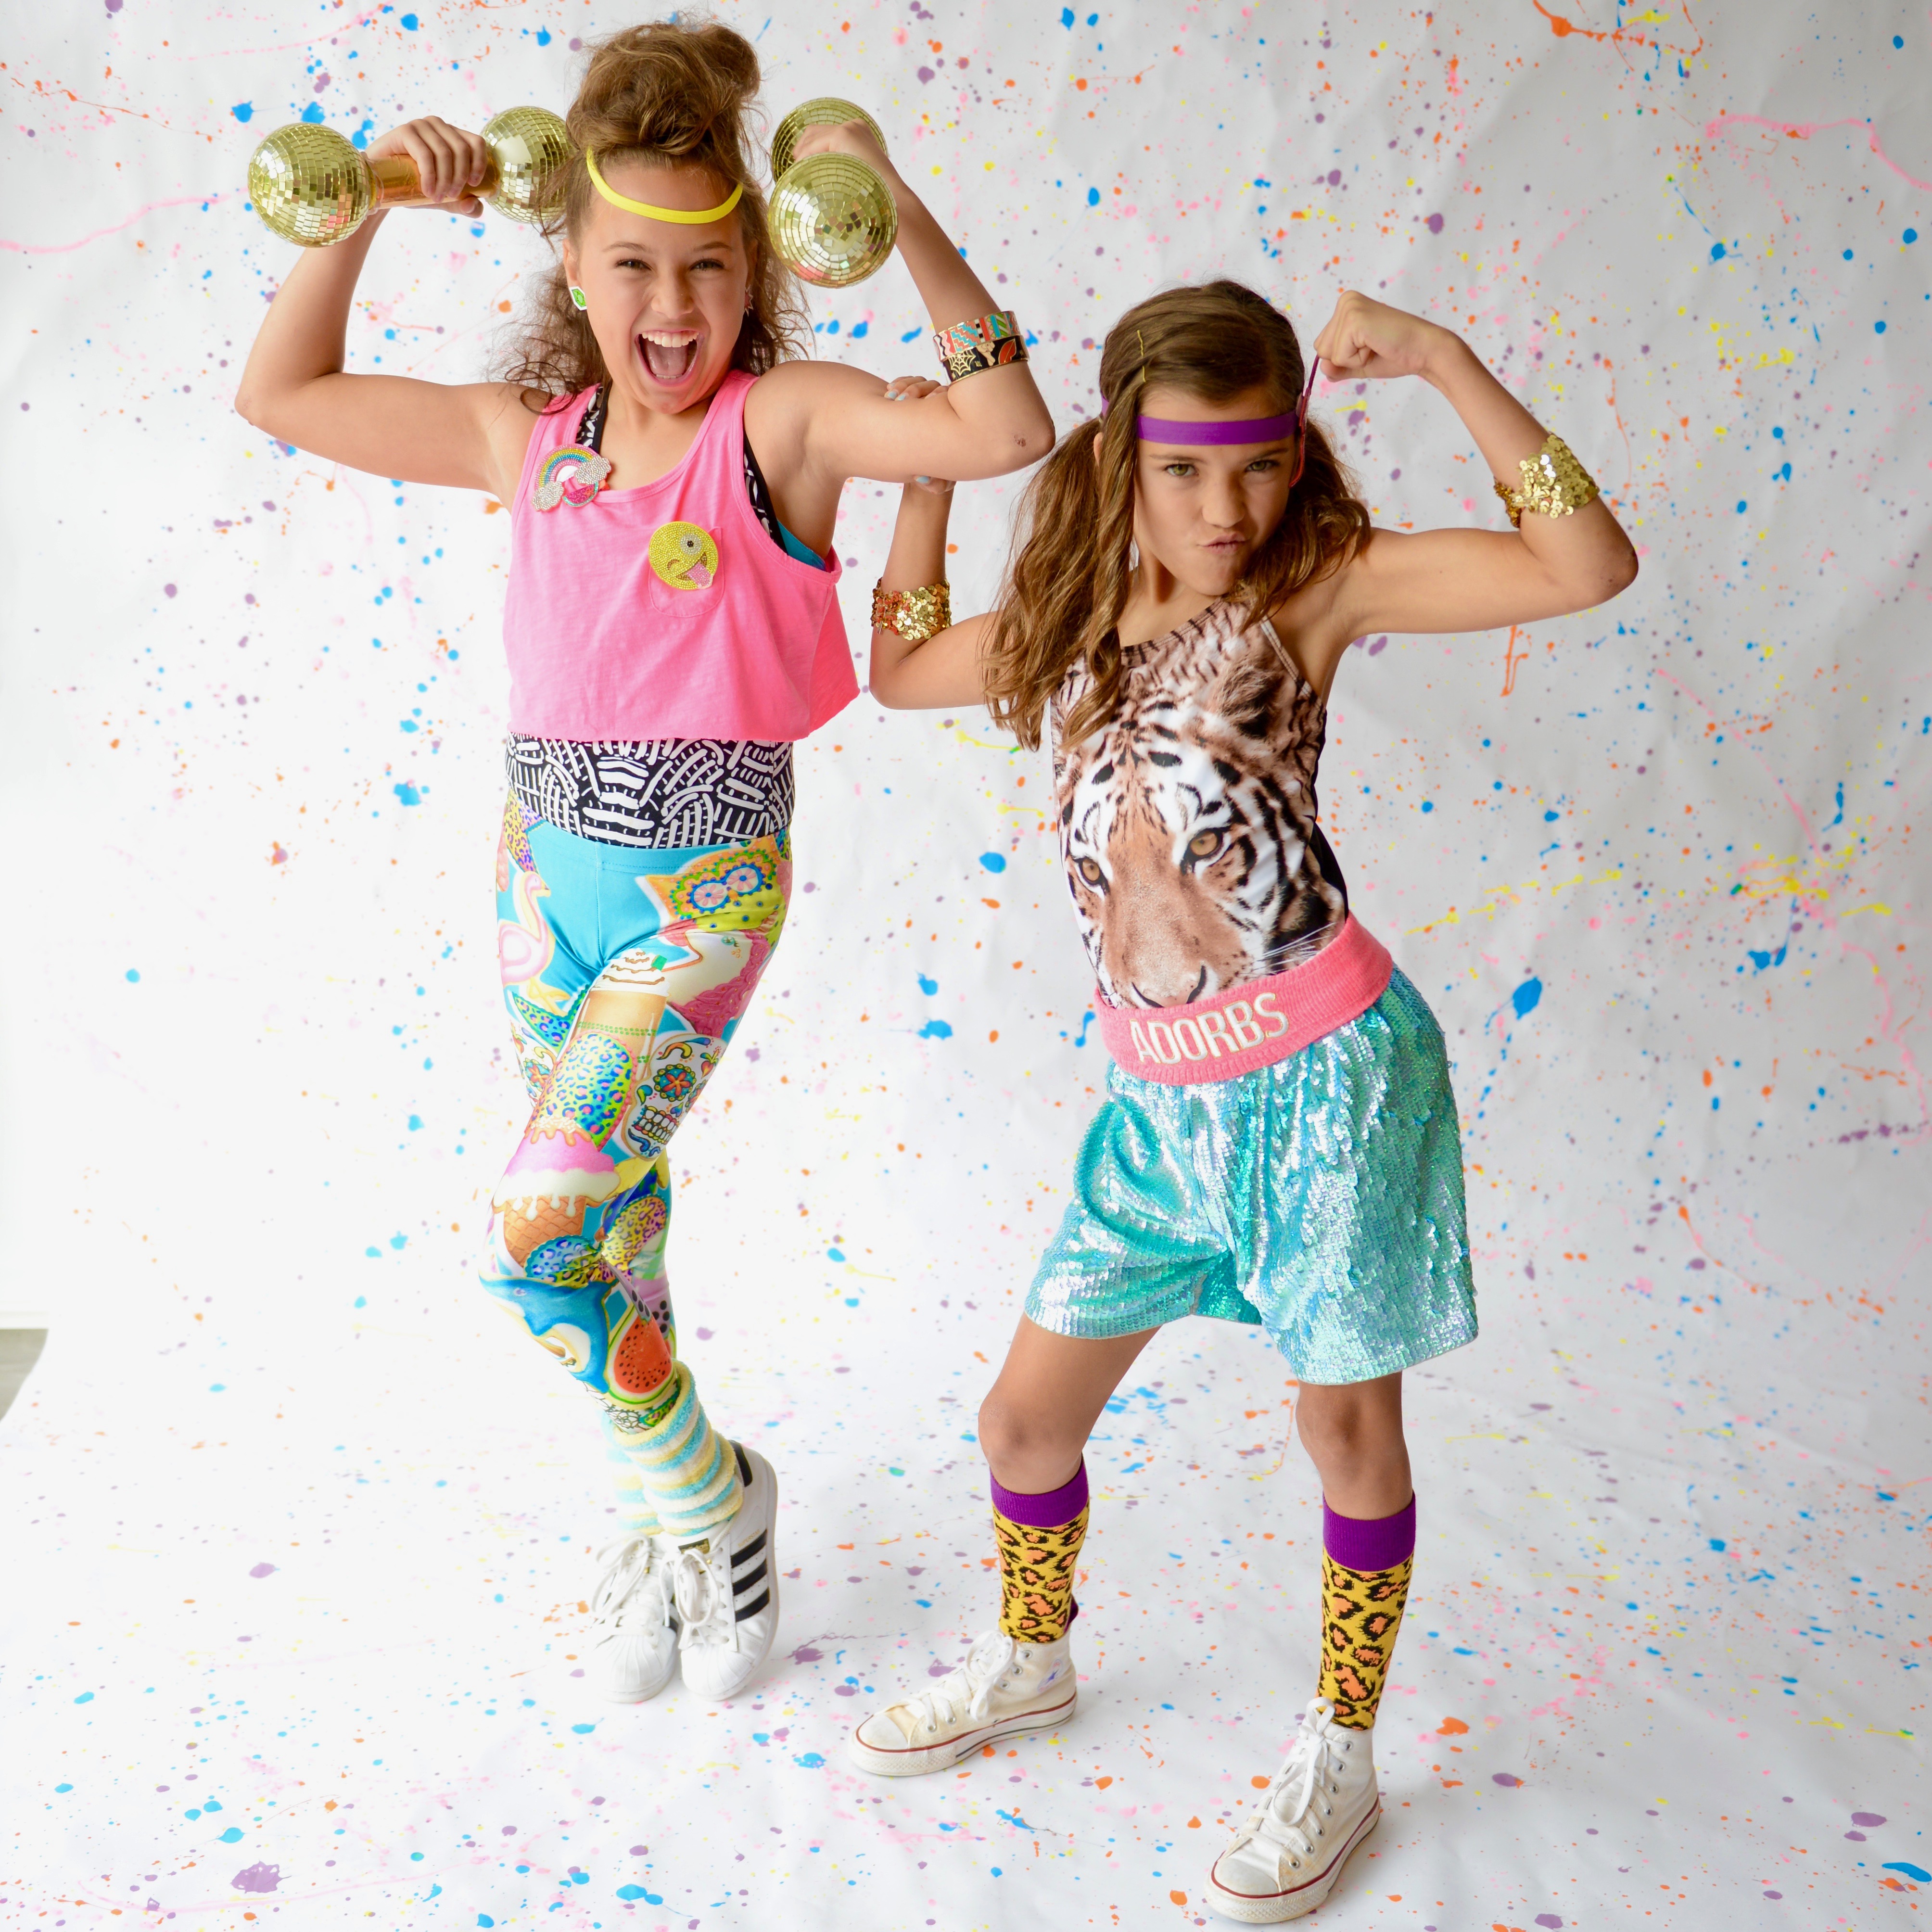 Girls Just Wanna Have Totally 80s Dance Parties! (3)